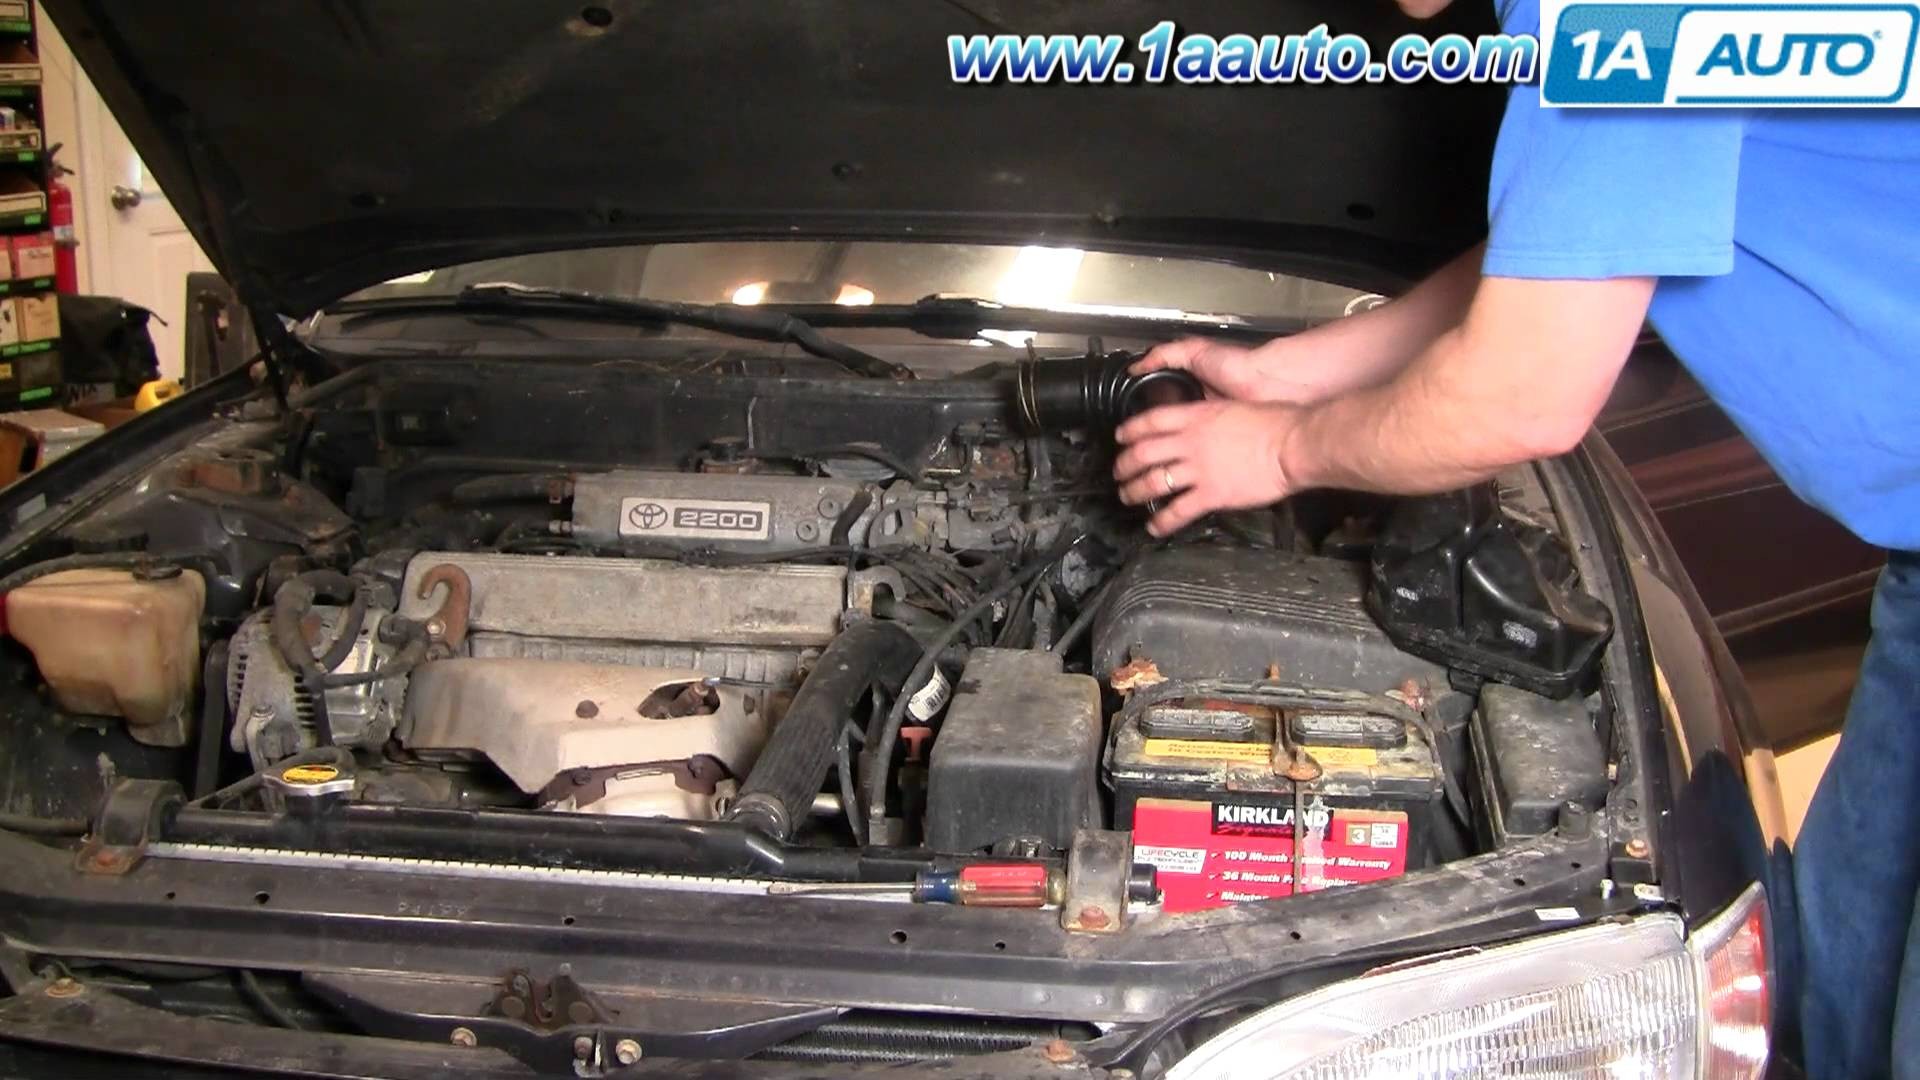 2001 toyota Camry 4 Cylinder Engine Diagram How to Install Replace Engine Air Intake Hose toyota Camry 2 2l 95